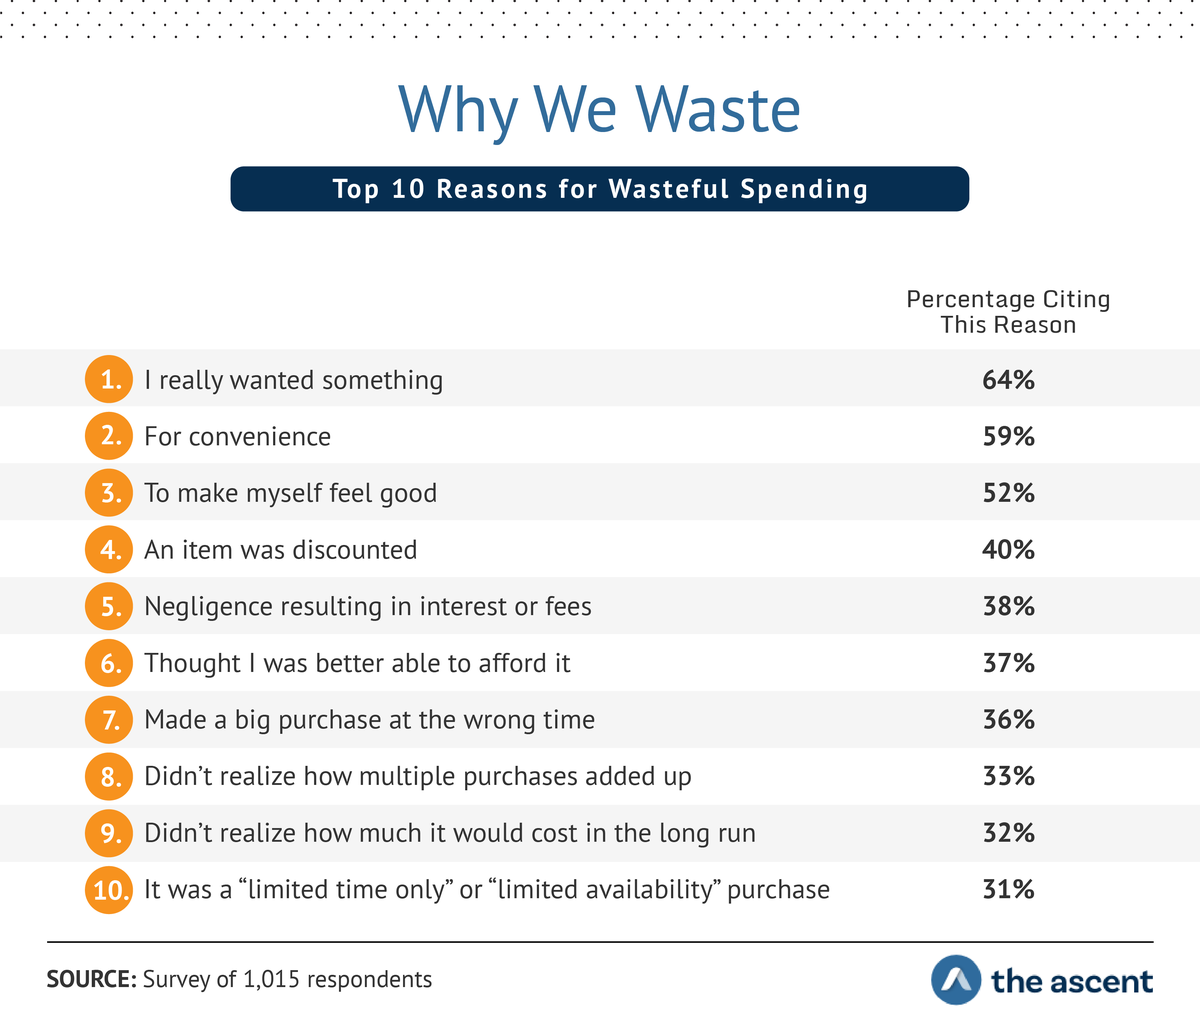 Why We Waste: Top 10 Reasons for Wasteful Spending...I really wanted something	64% For convenience	59% To make myself feel good	52% An item was discounted	40% Negligence resulting in interest or fees	38% Thought I was better able to afford it	37% Made a big purchase at the wrong time	36% Didn’t realize how multiple purchases added up	33% Didn’t realize how much it would cost in the long run	32% It was a “limited time only” or “limited availability” purchase	31%